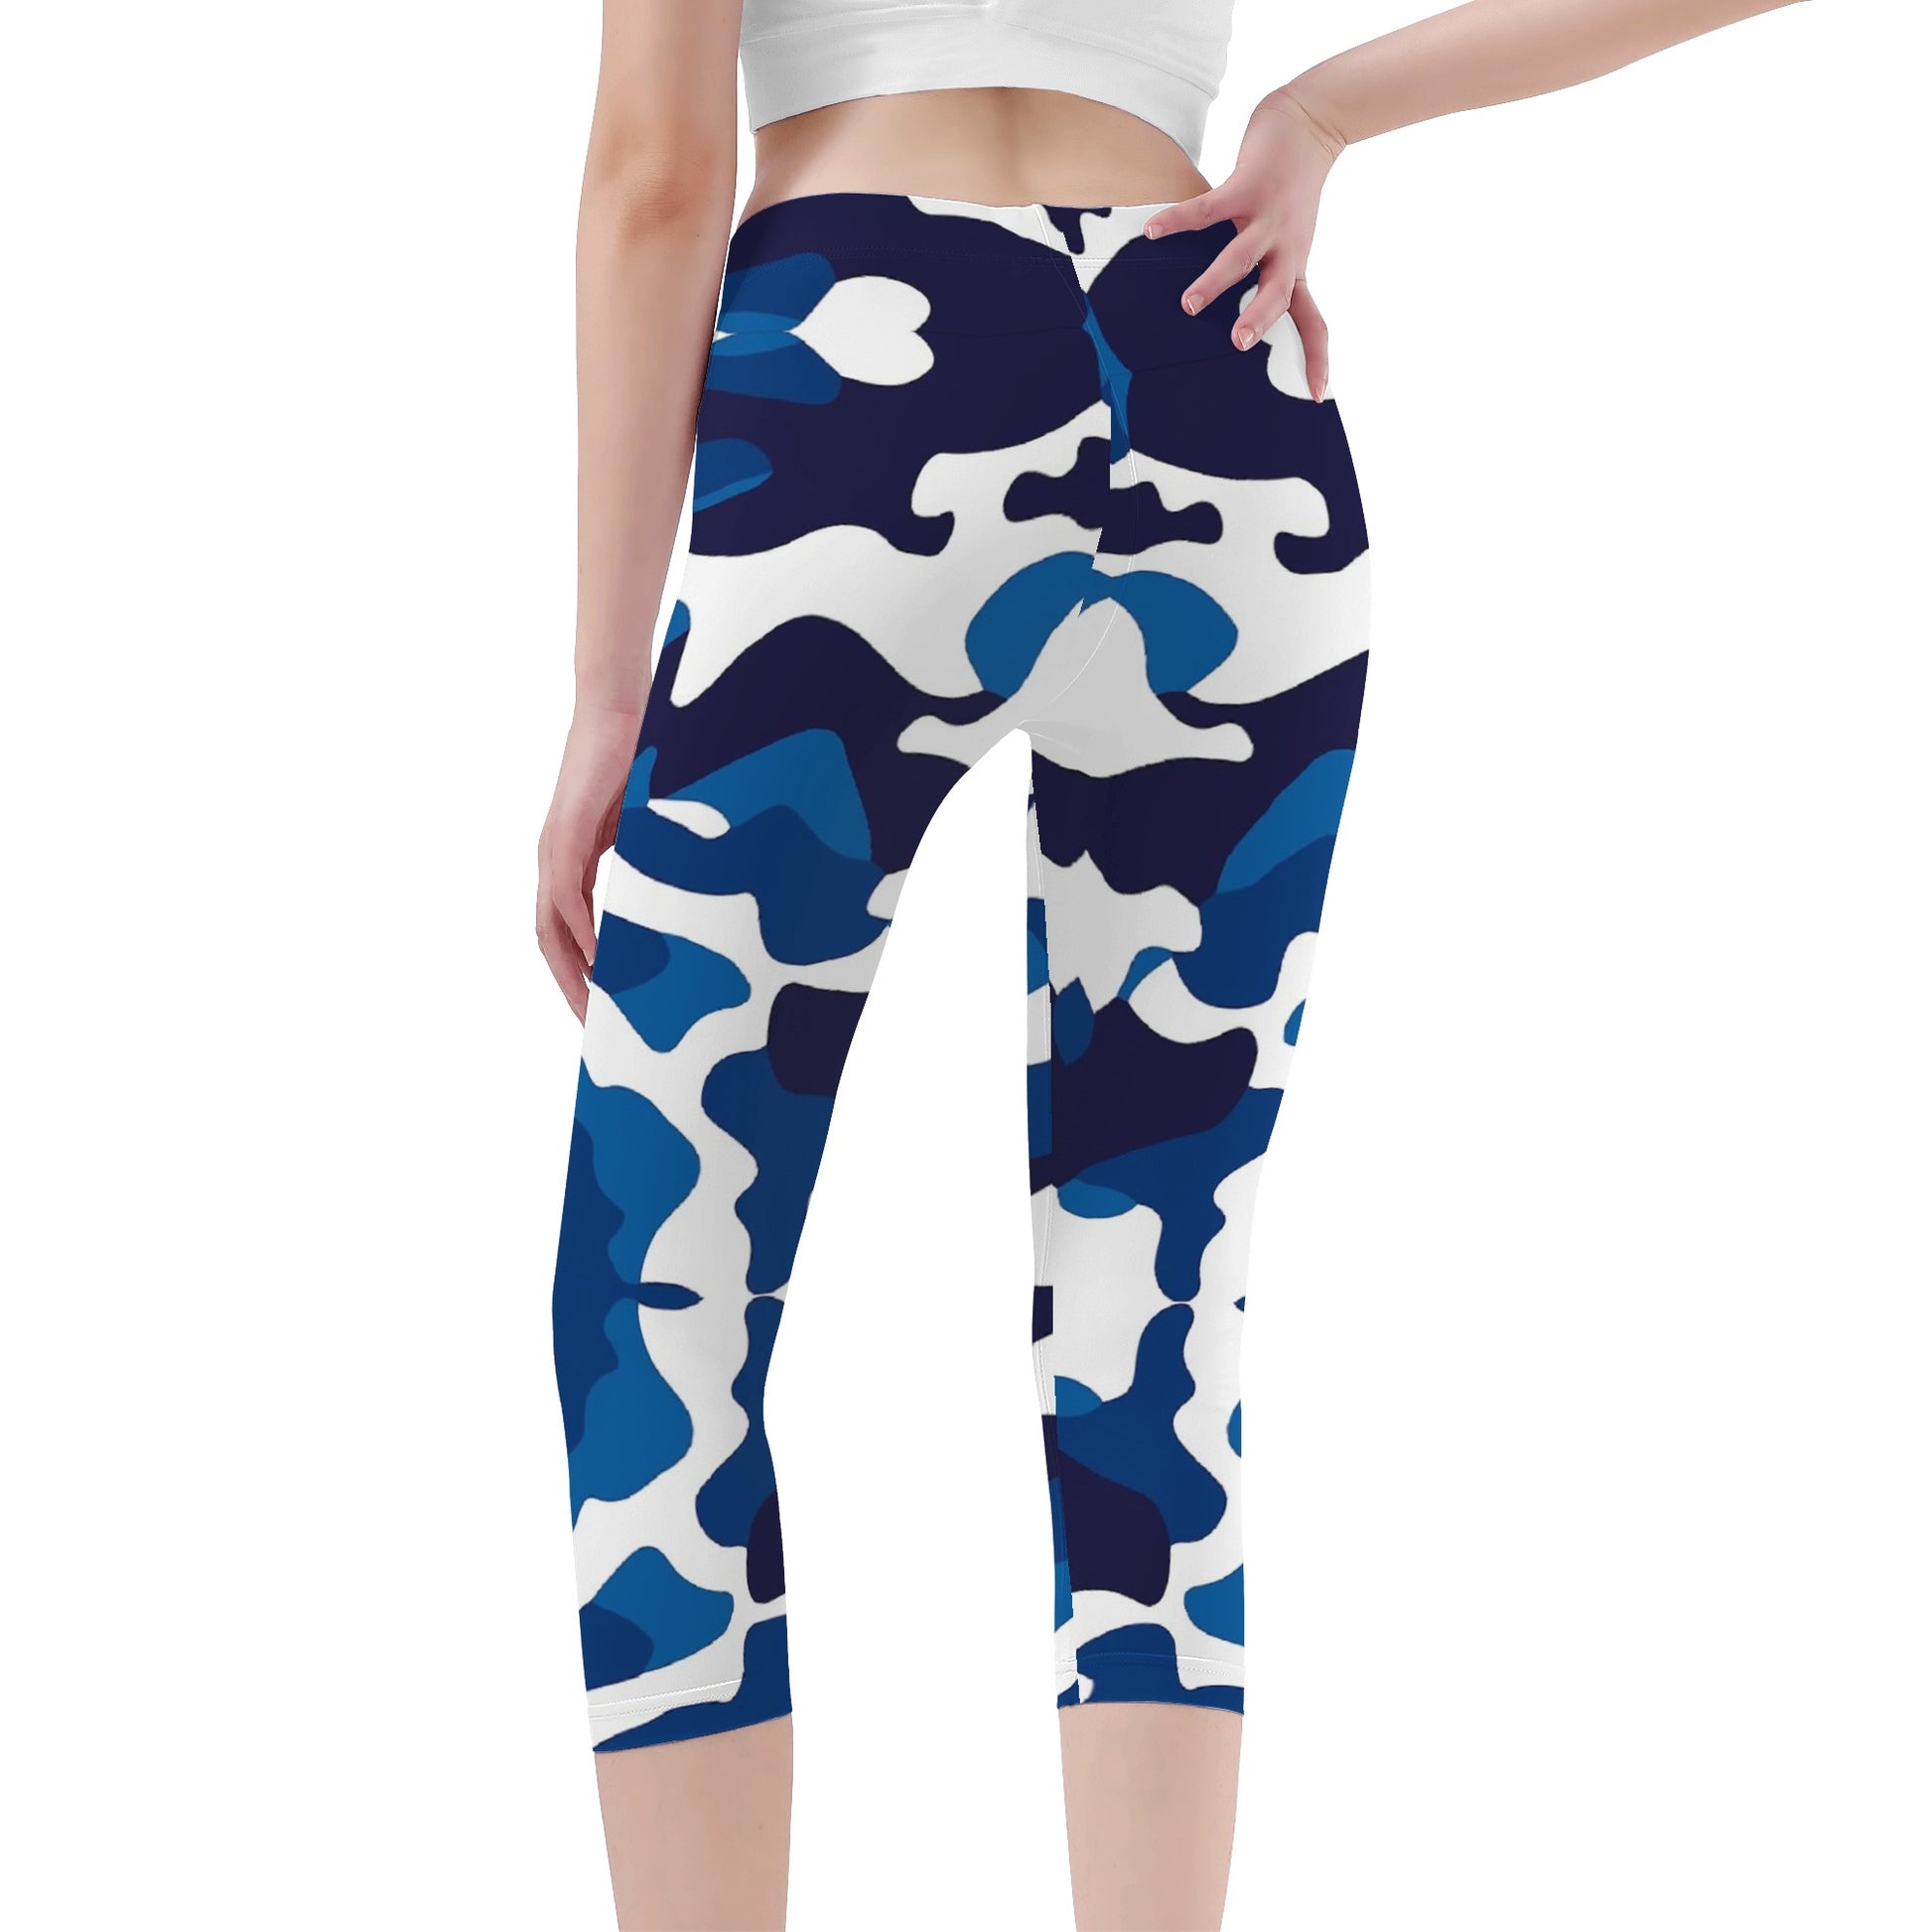 Stand out  with the  Nugget Army Medic Womens Capris  available at Hey Nugget. Grab yours today!